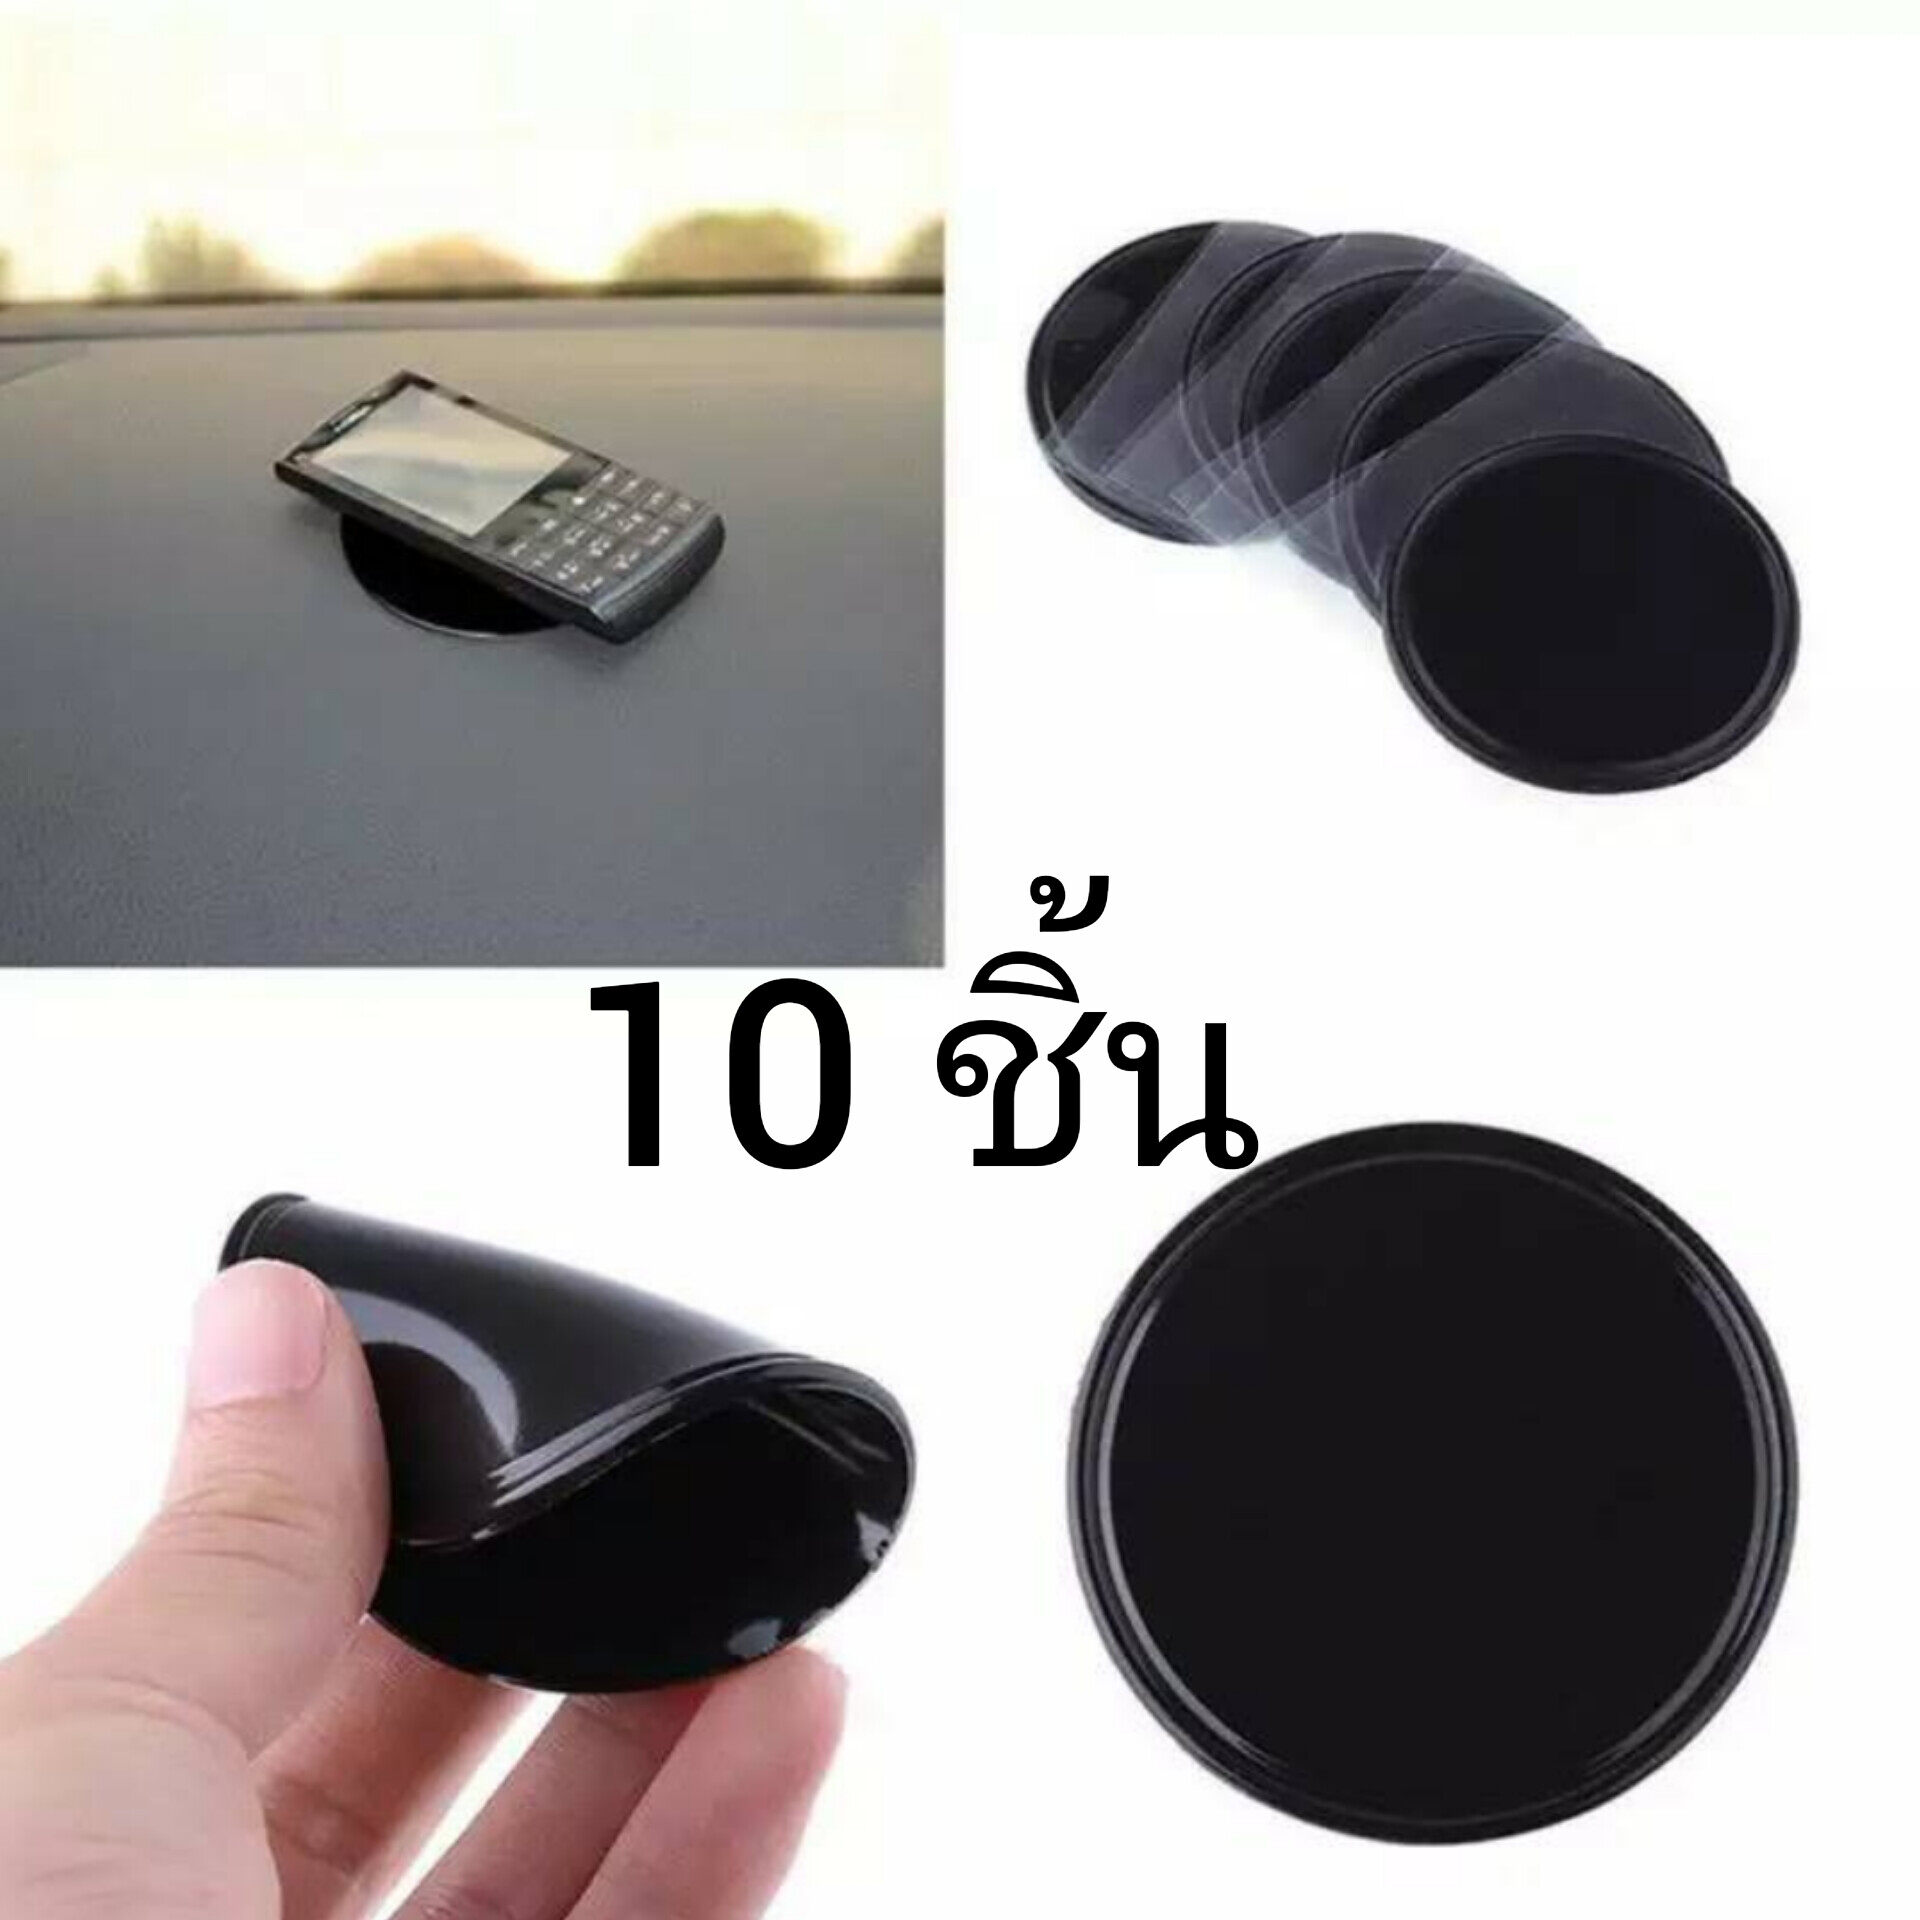 10PCS Thick 1.5mm Anti-slip Self Adhesive Silicone Rubber Feet Pad  Shockproof Oval Mat Protectors